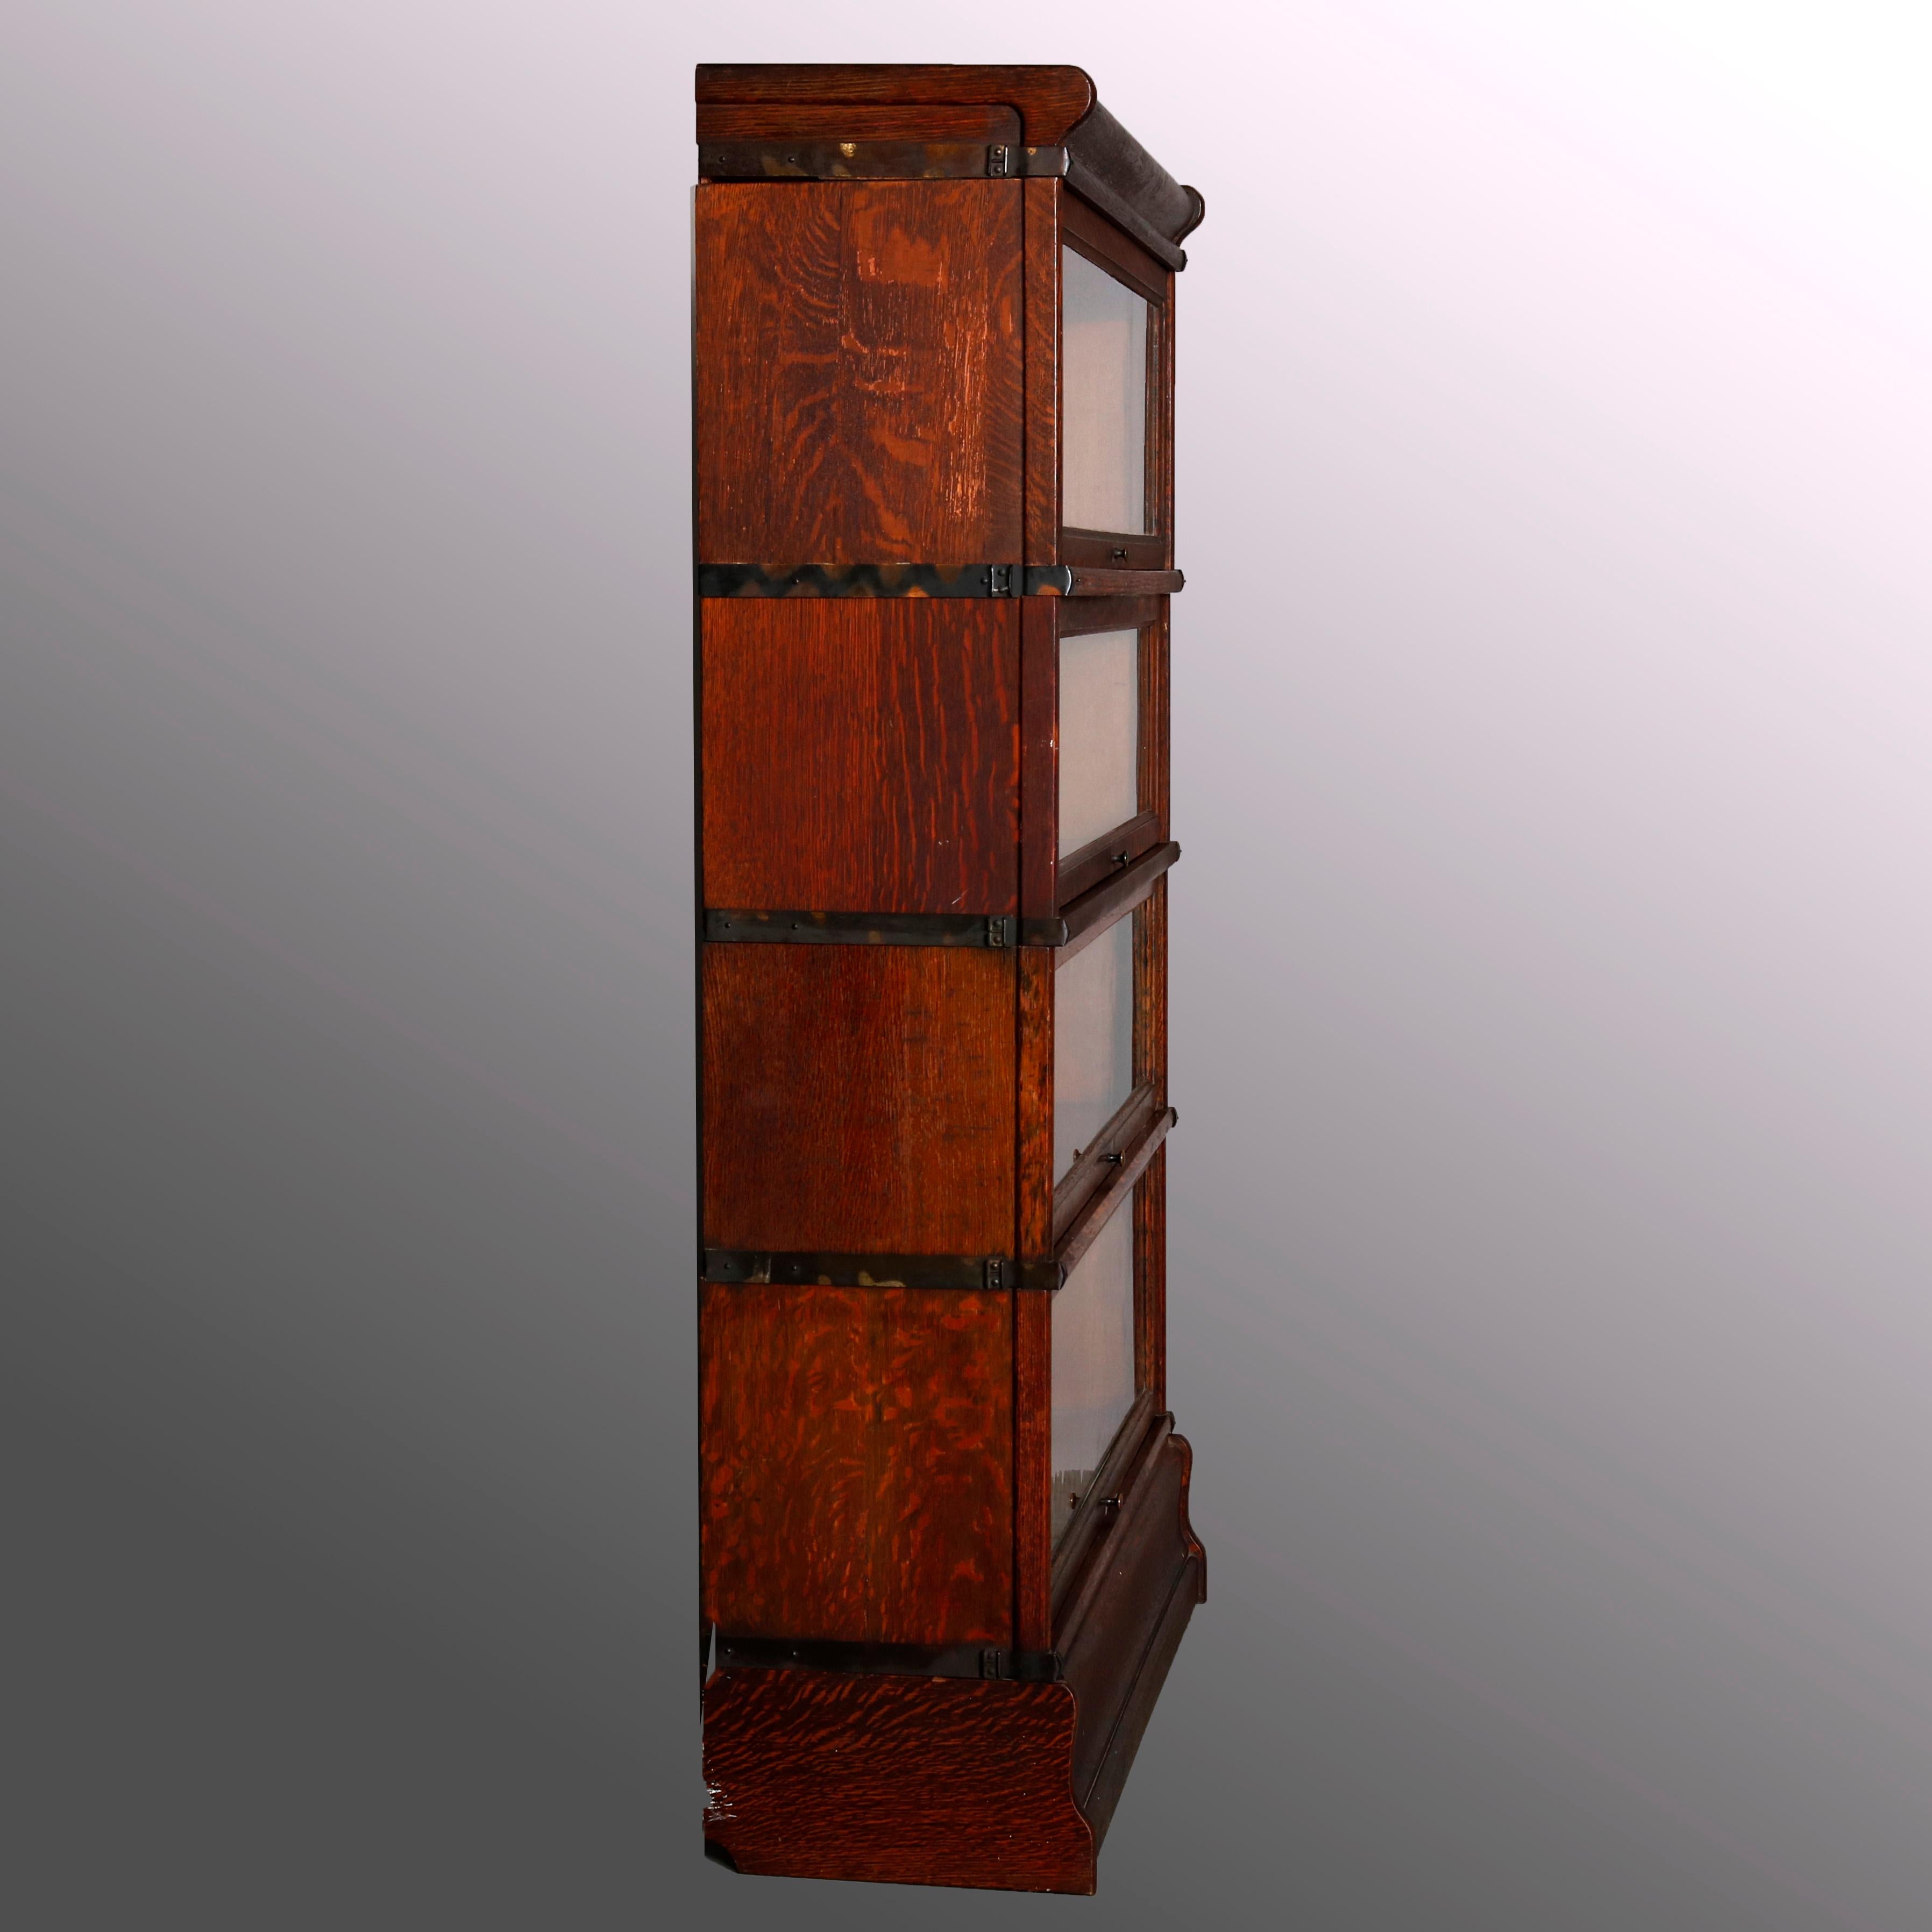 An antique Arts & Crafts mission oak barrister bookcase by Globe Wernicke offers quarter sawn oak construction with four stacks, each having pull-out glass doors and original maker labels, one stack by Mace as photographed, original labels, circa